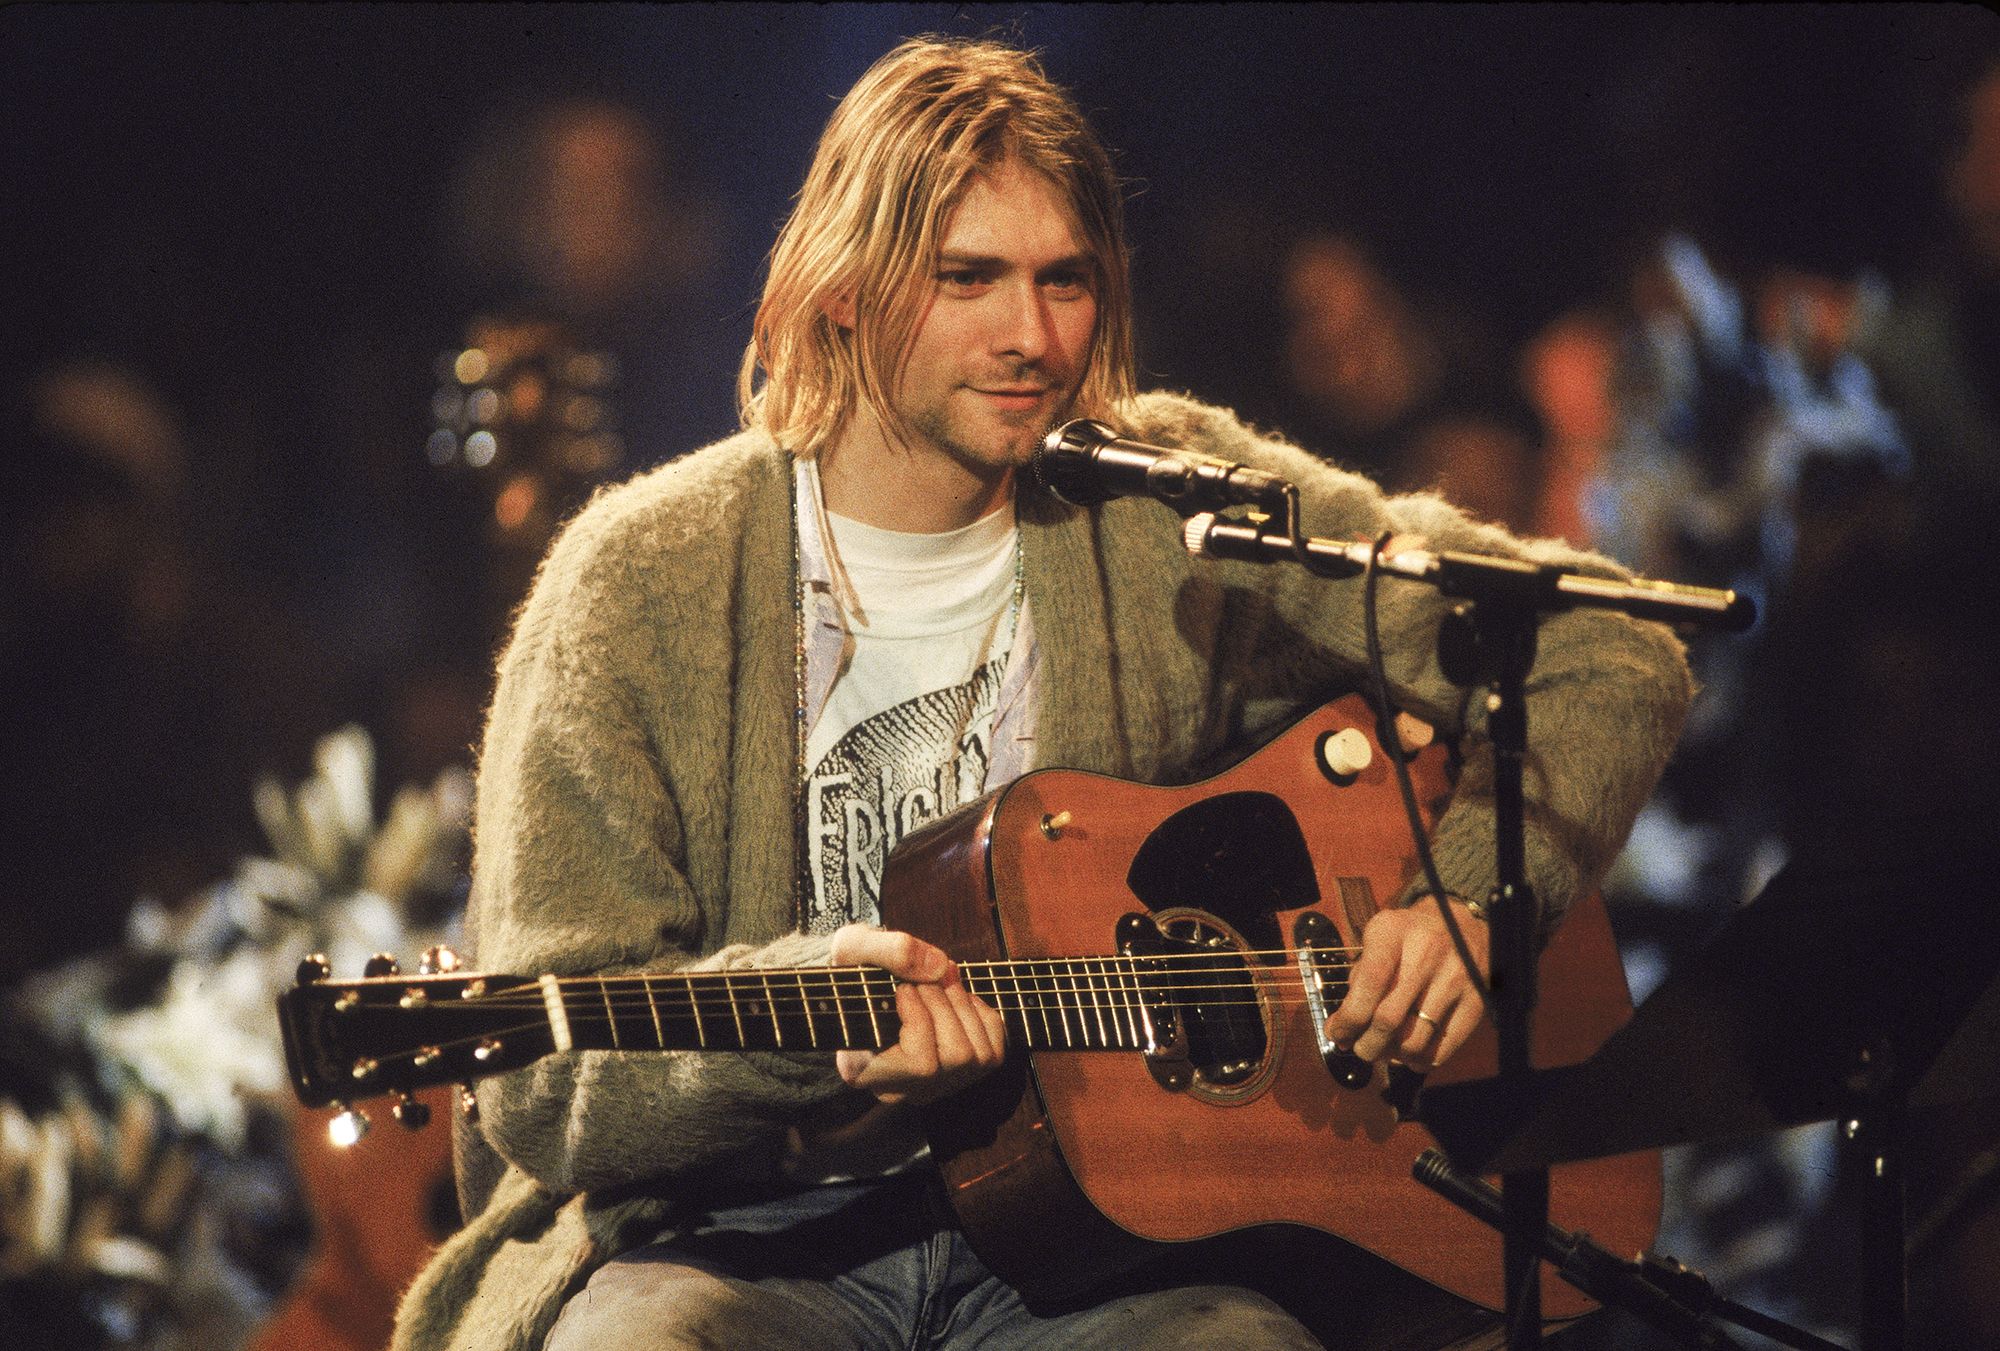 You're not going to believe how much Kurt Cobain's cardigan sold